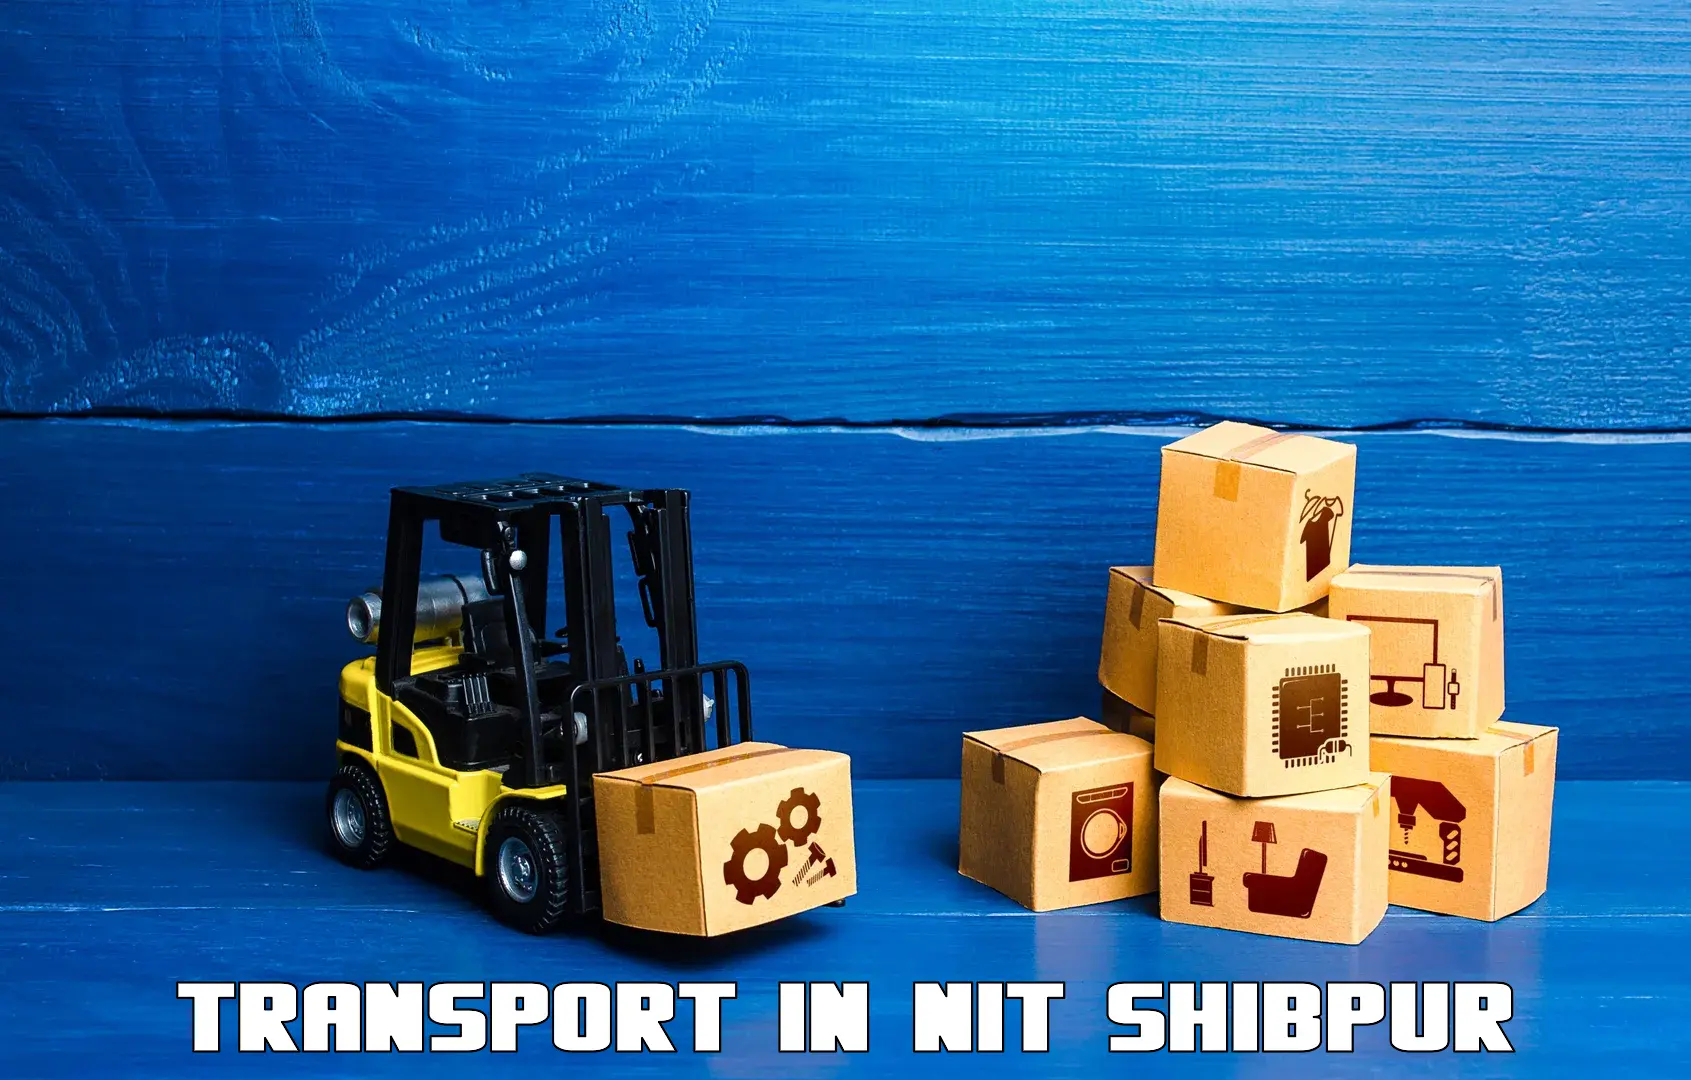 Cargo transport services in NIT Shibpur